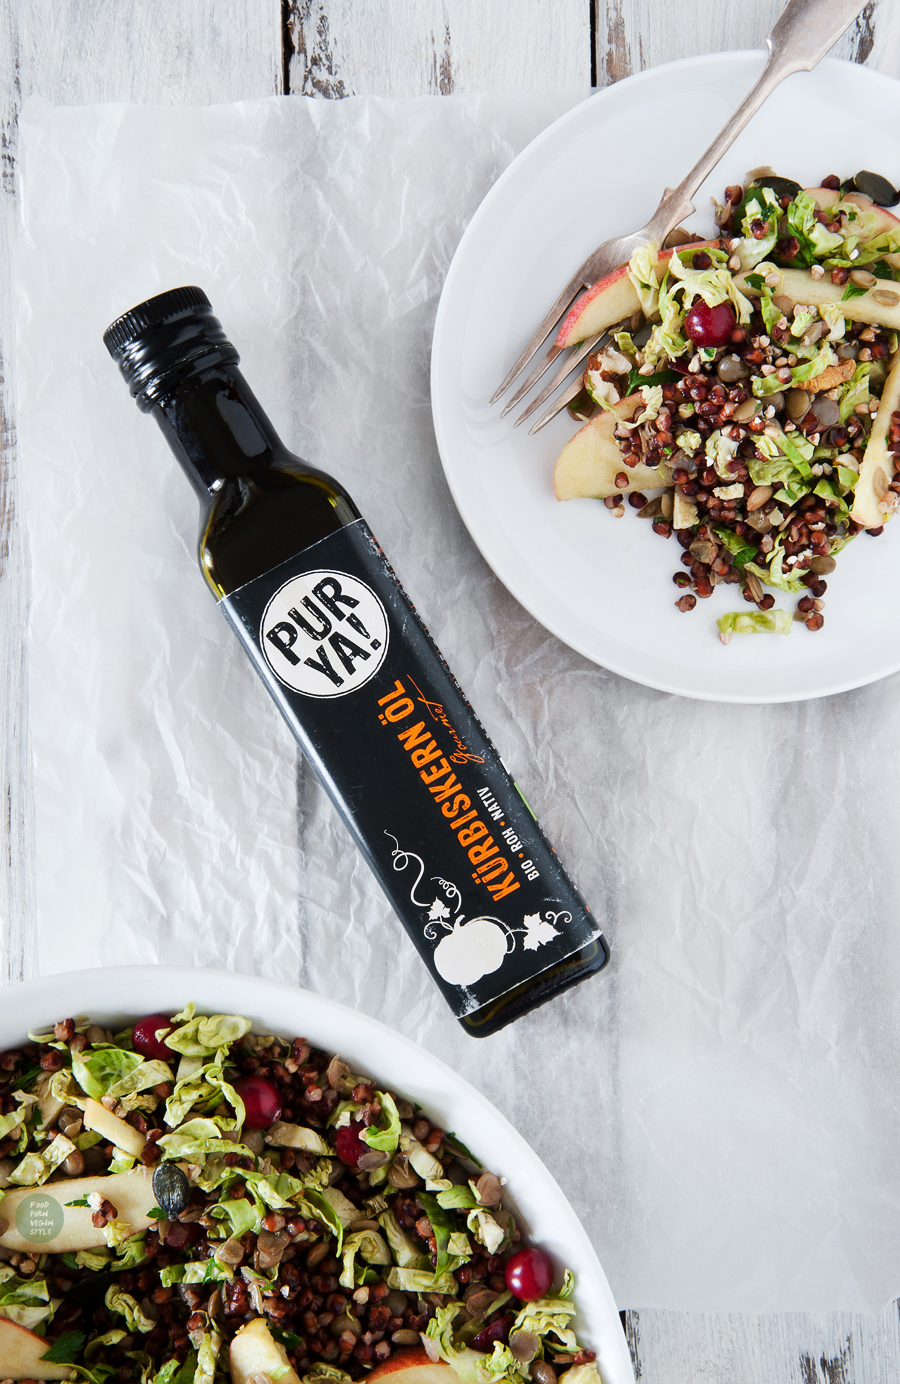 VEGAN AUTUMN SALAD WITH SORGHUM GRAINS, LENTILS, BRUSSELS SPROUTS, CRANBERRIES AND PURYA! RAW PUMPKIN SEED OIL